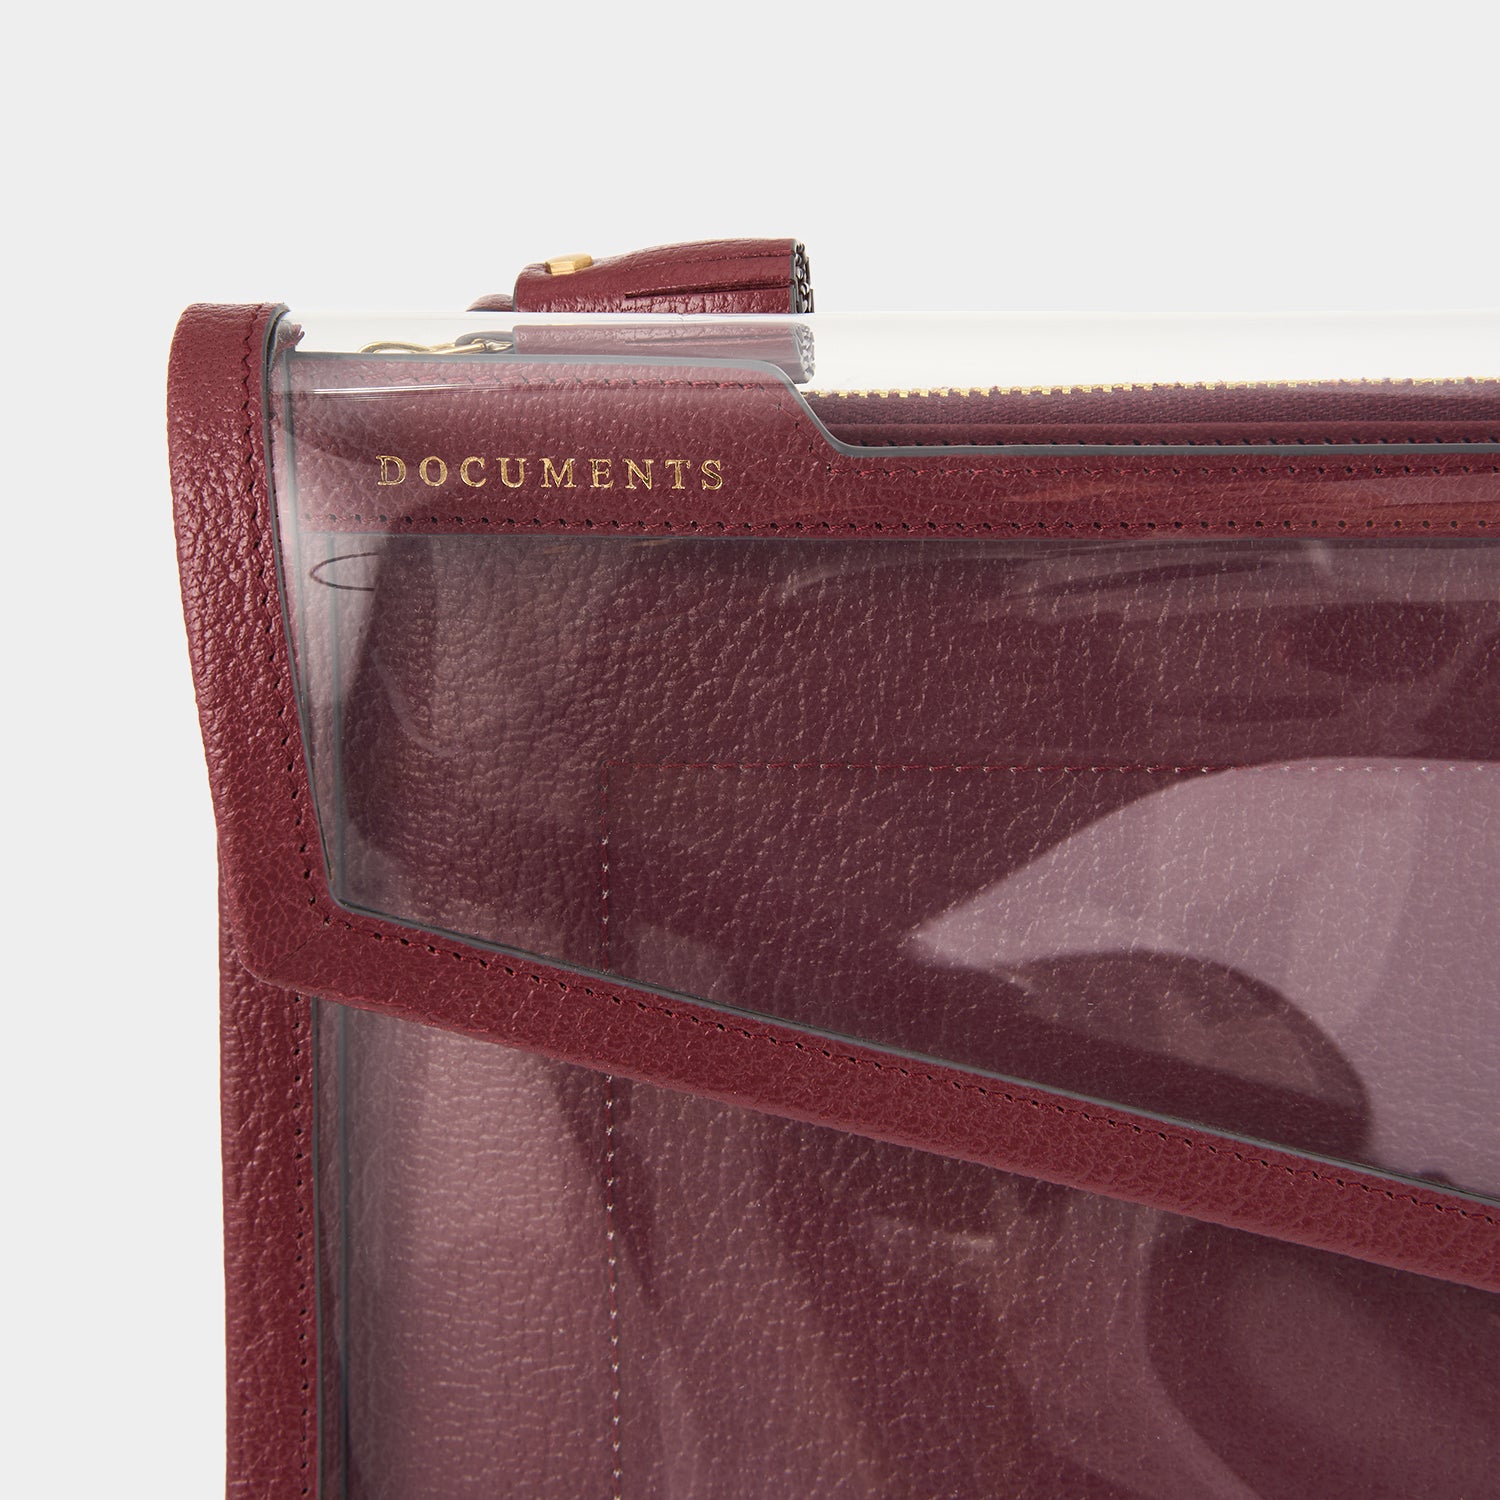 Documents Envelope -

                  
                    Capra Leather in Medium Red/Clear -
                  

                  Anya Hindmarch UK
